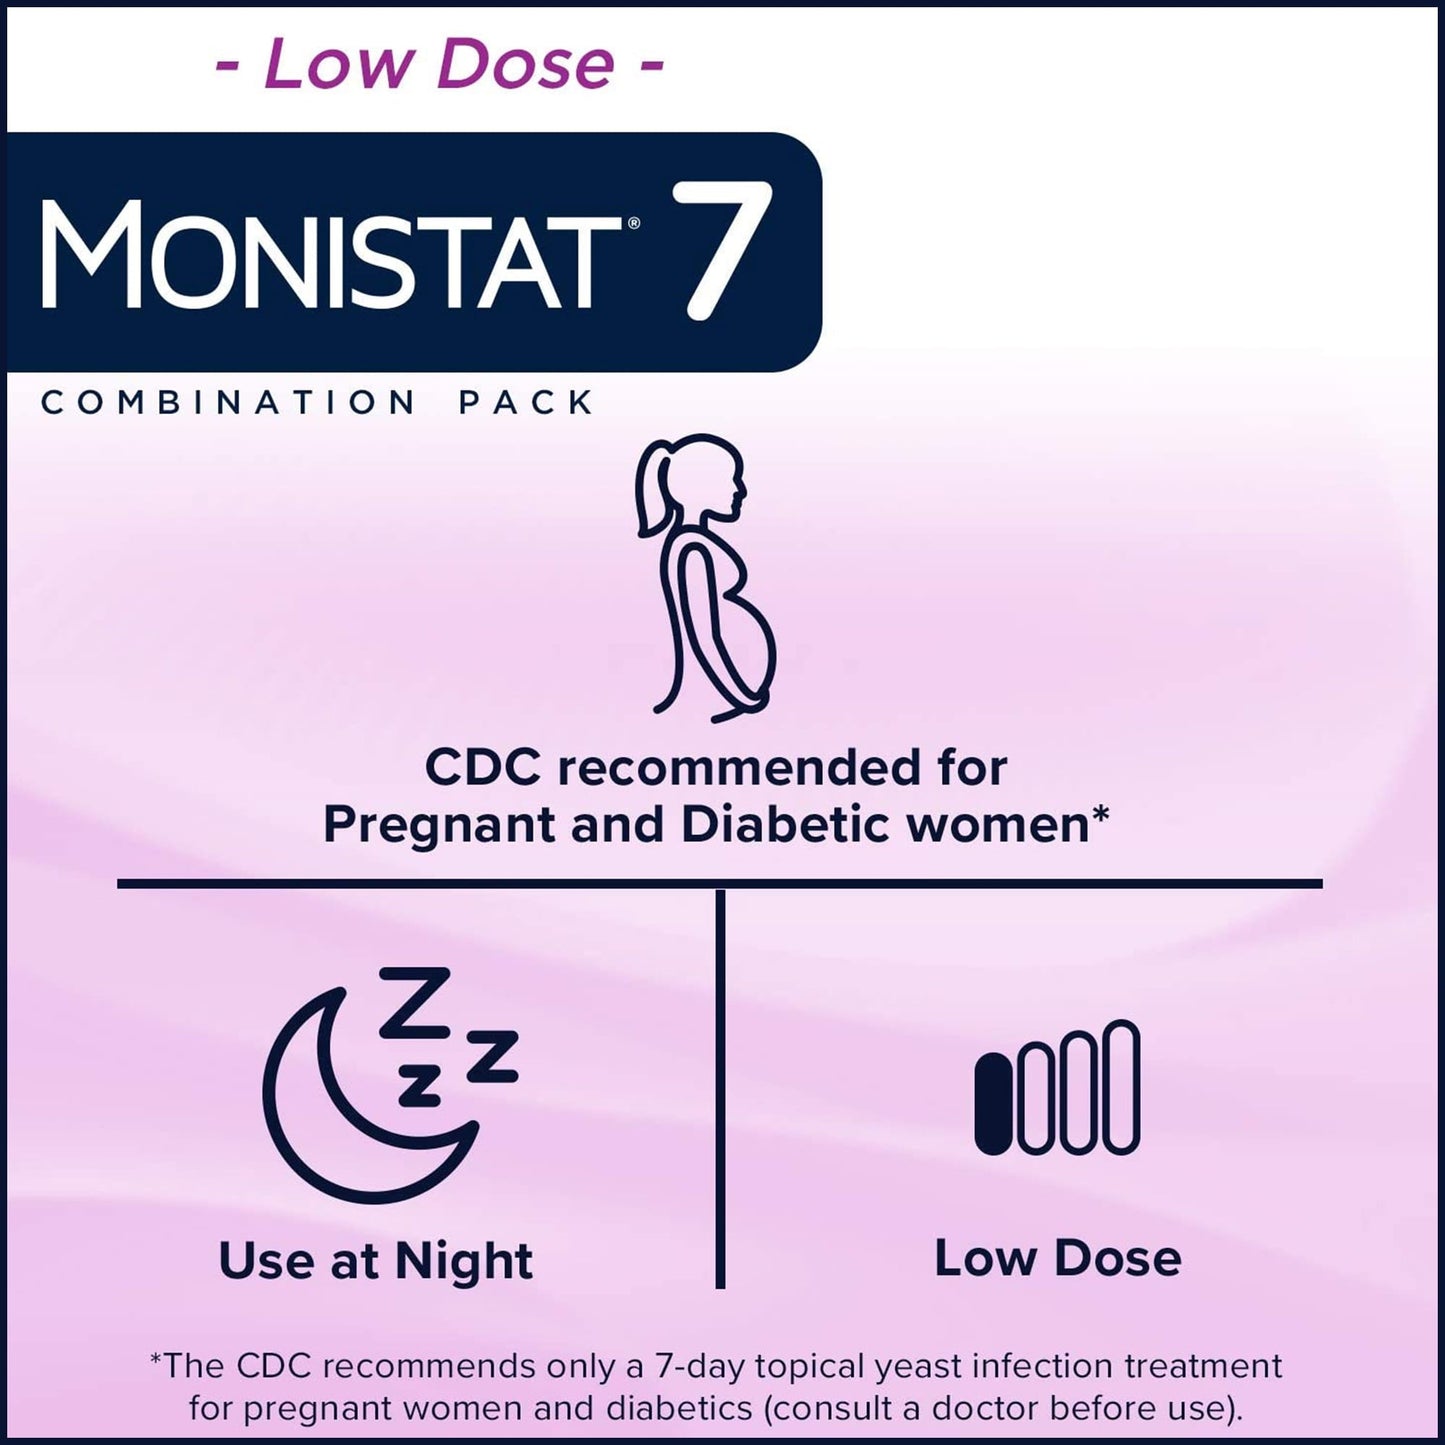 Monistat 7 Day Yeast Infection Treatment, 7 Disposable Miconazole Cream Tubes & External Itch Cream